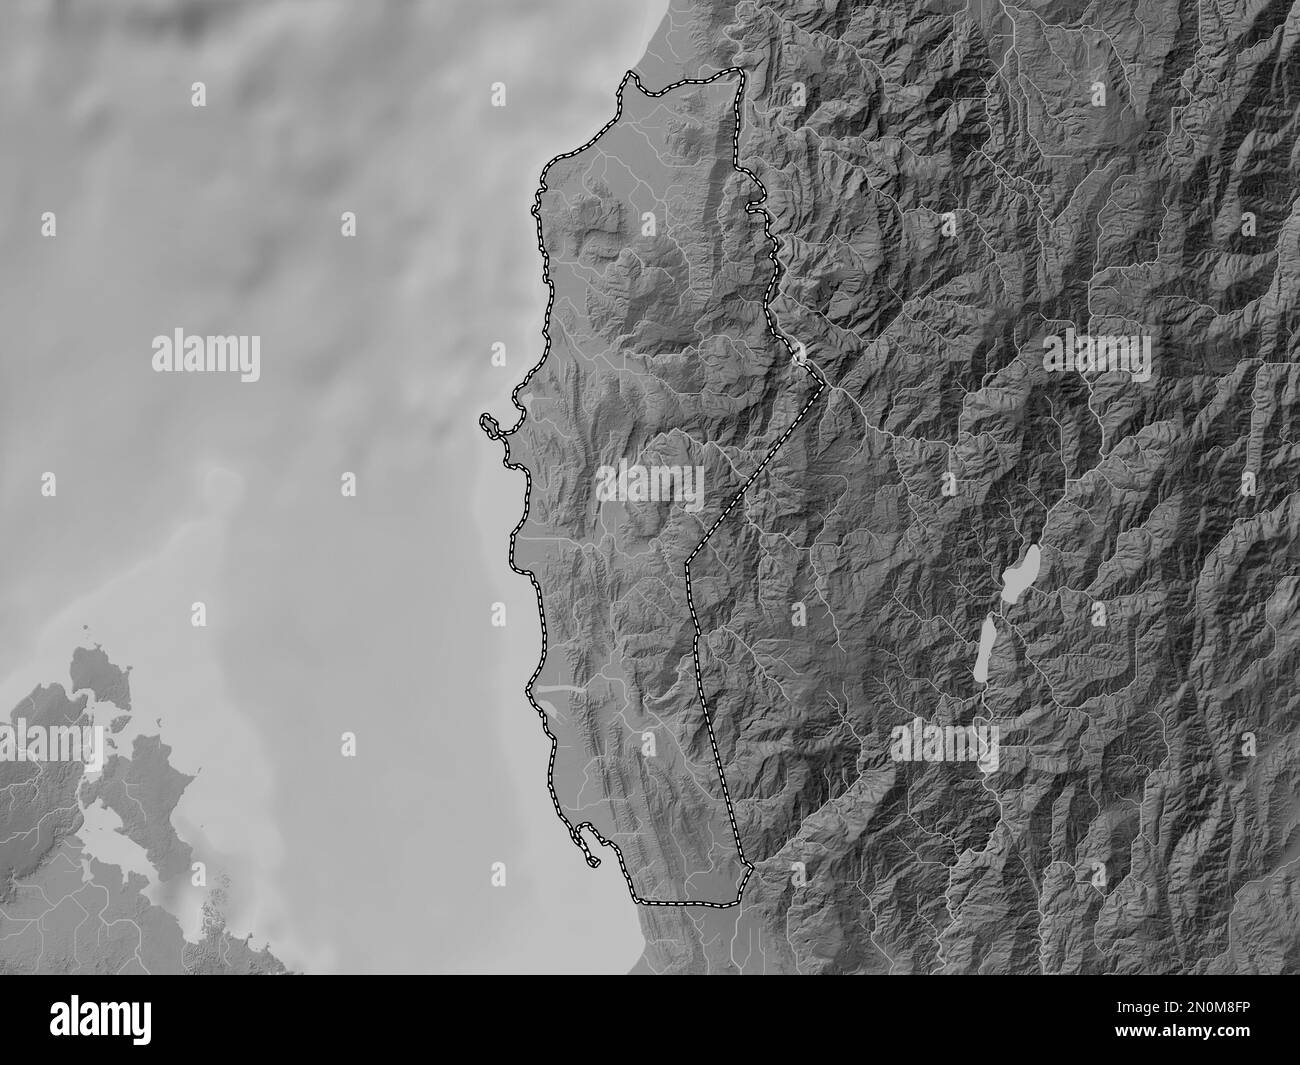 La Union, province of Philippines. Grayscale elevation map with lakes and rivers Stock Photo